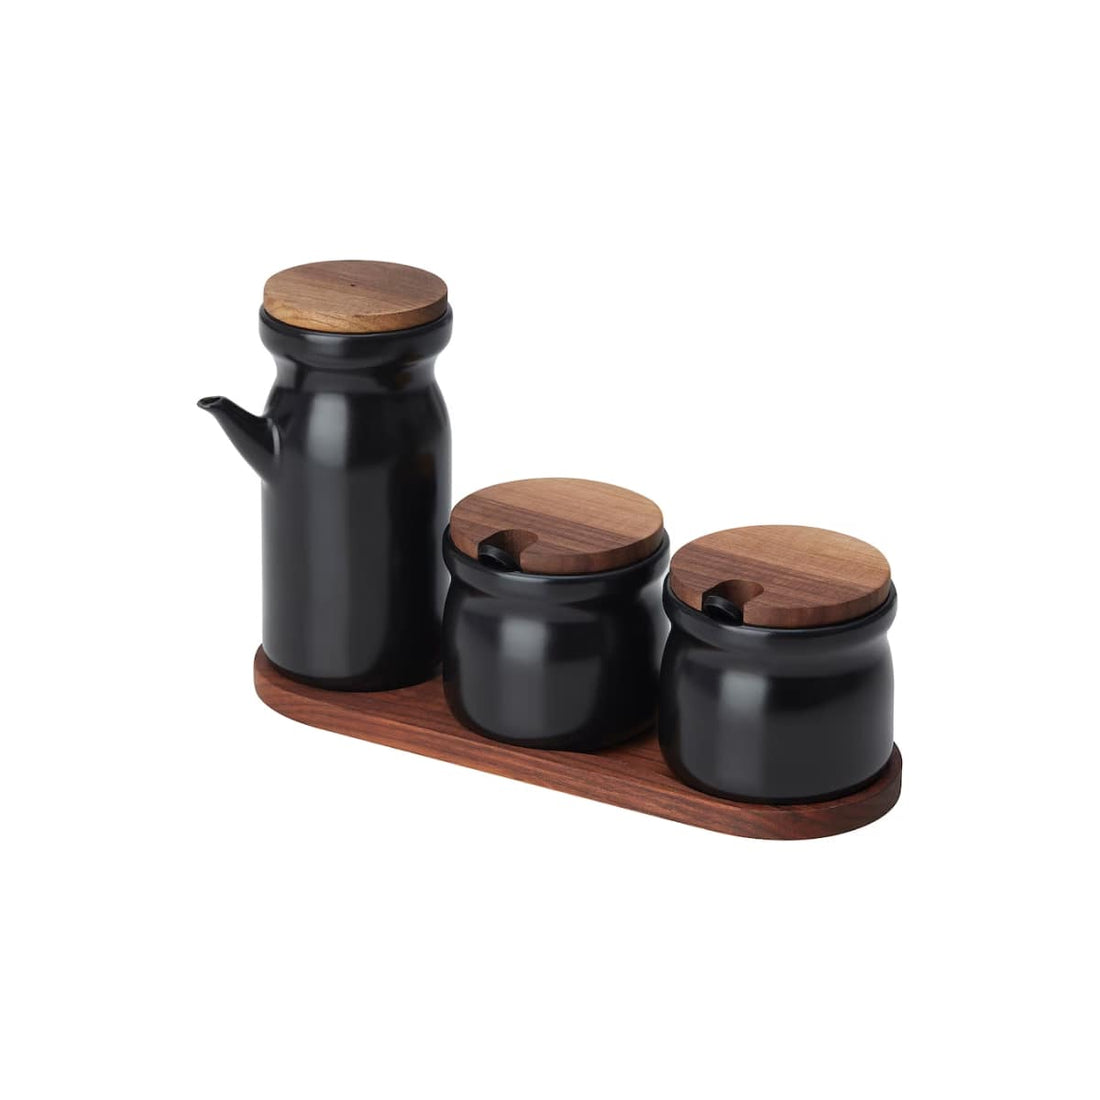 Huldhet Spice Jar With Tray Set of 3